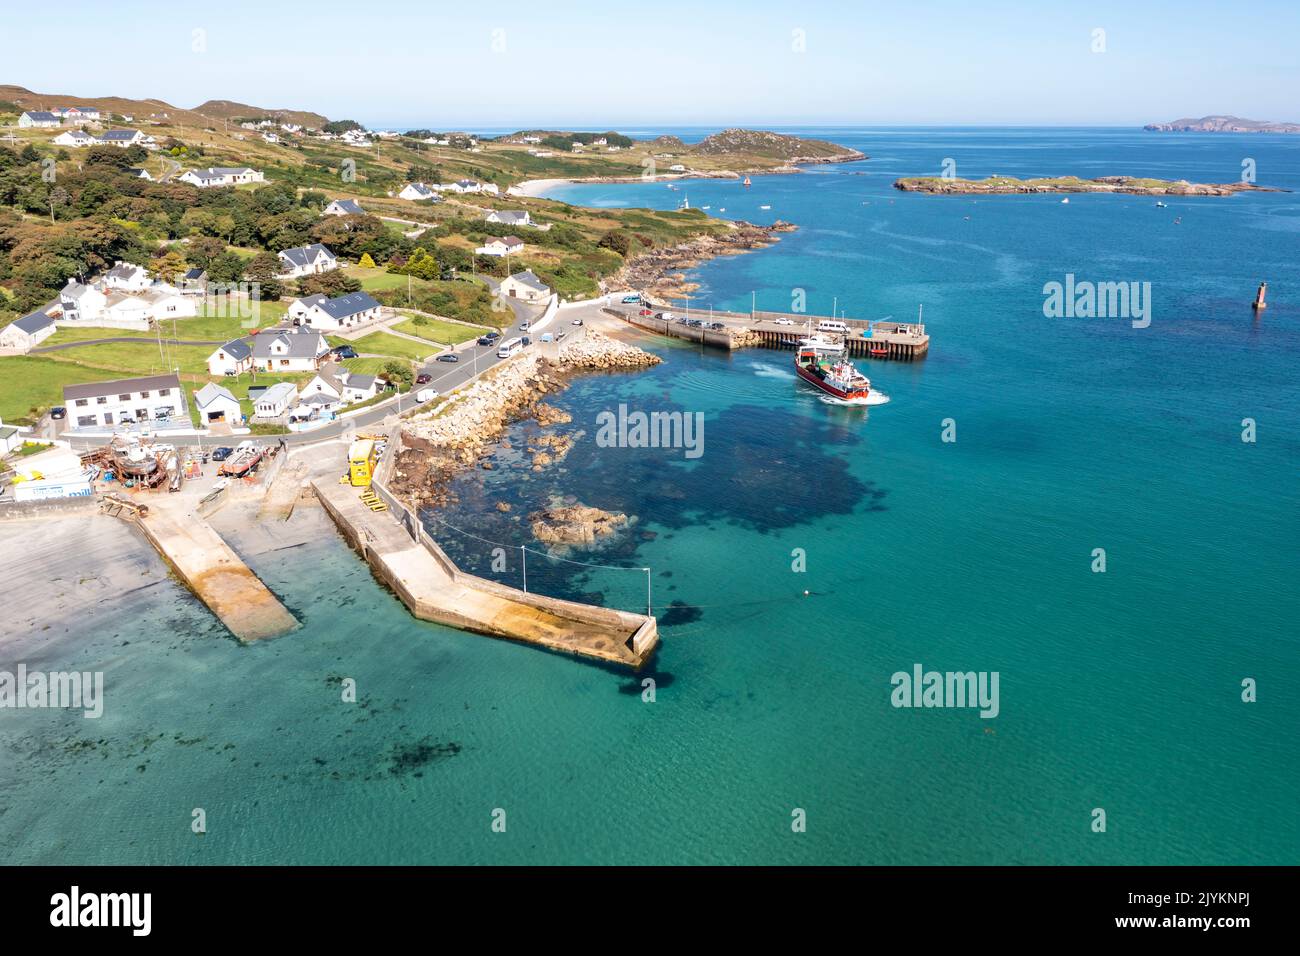 Aerial view of the pier Leabgarrow on Arranmore Island in County Donegal, Republic of Ireland. Stock Photo